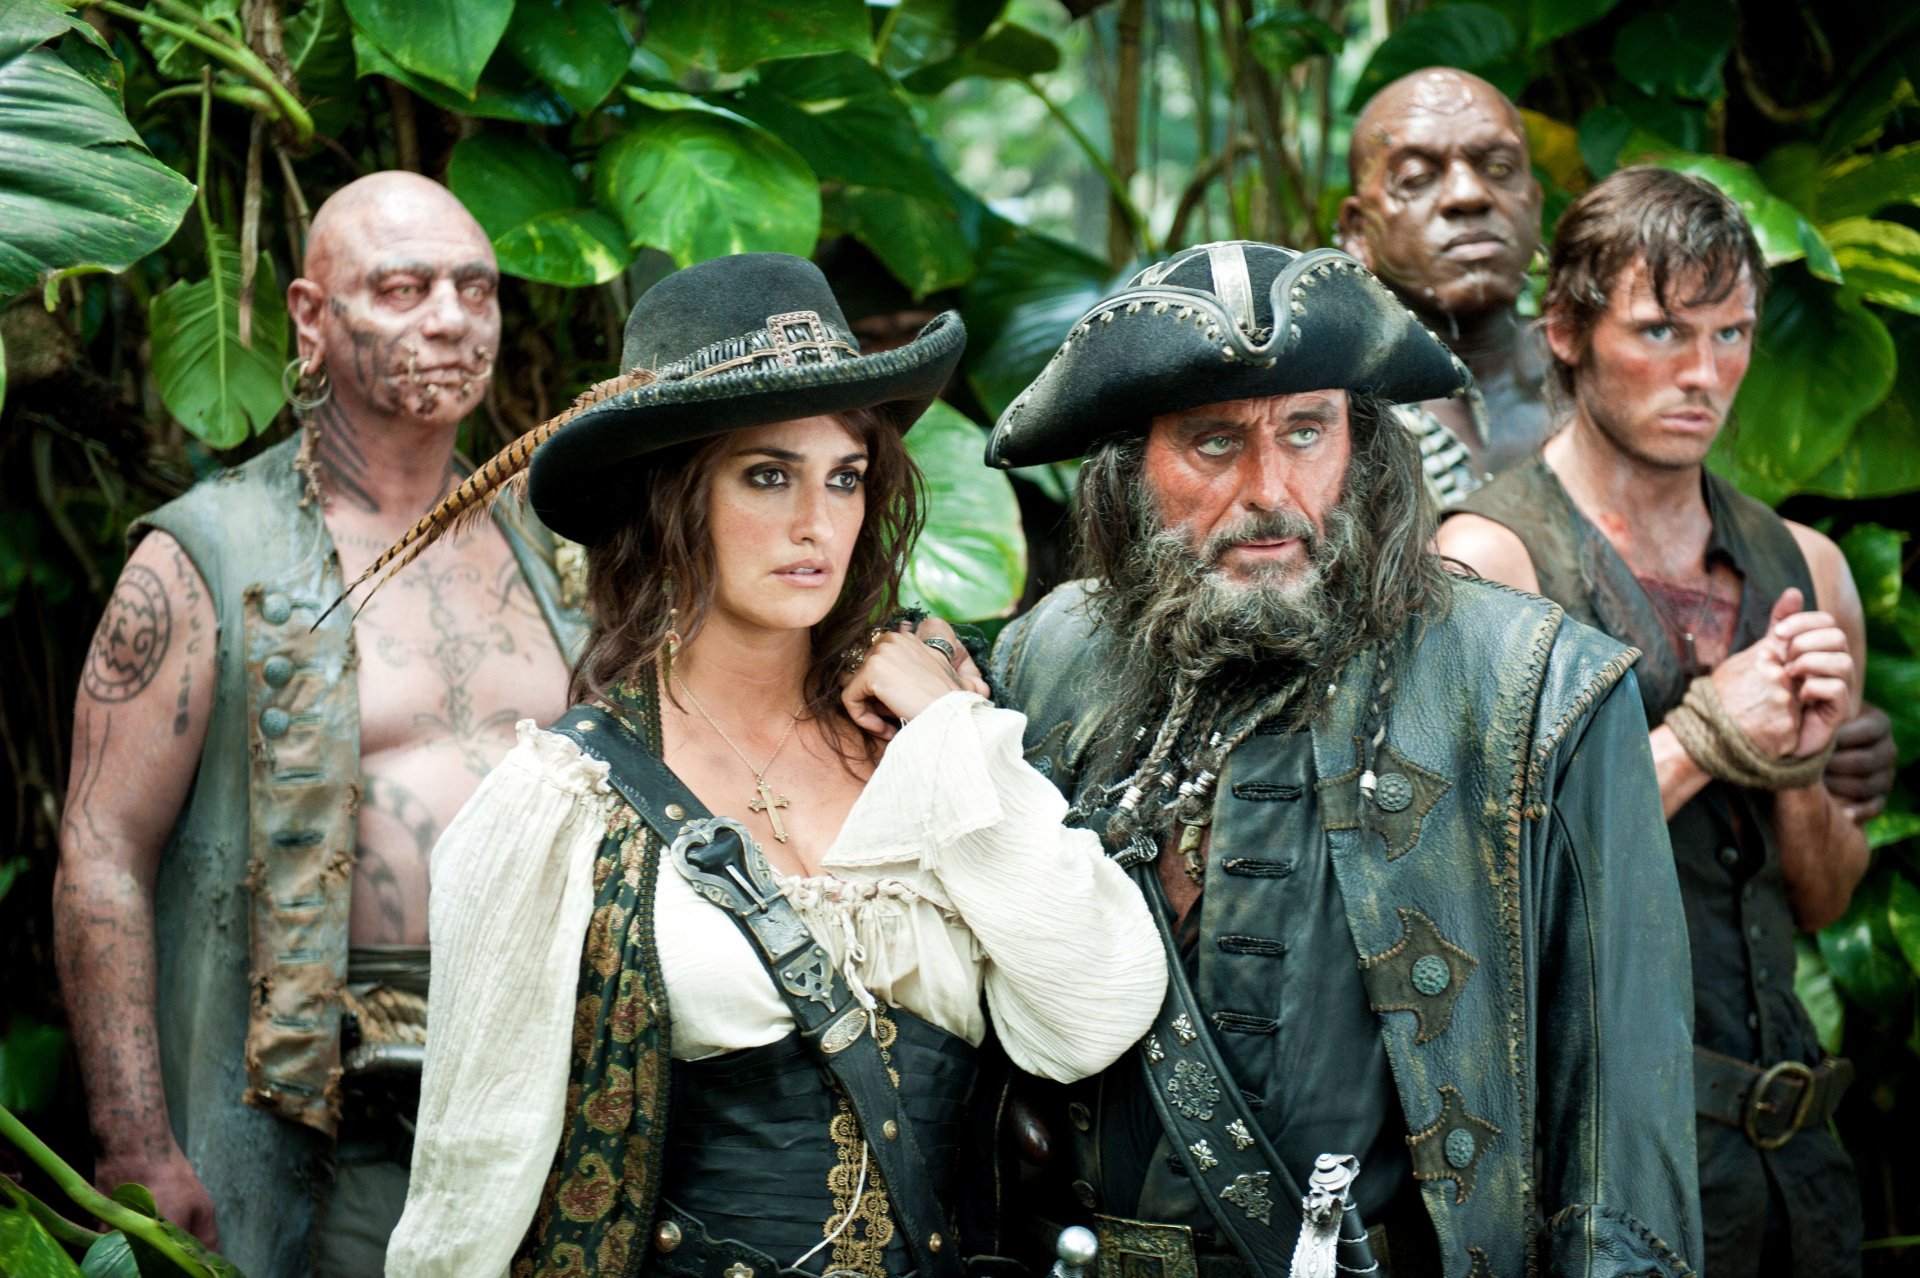 Pirates of the caribbean stranger tides full movie in hd fadguitar